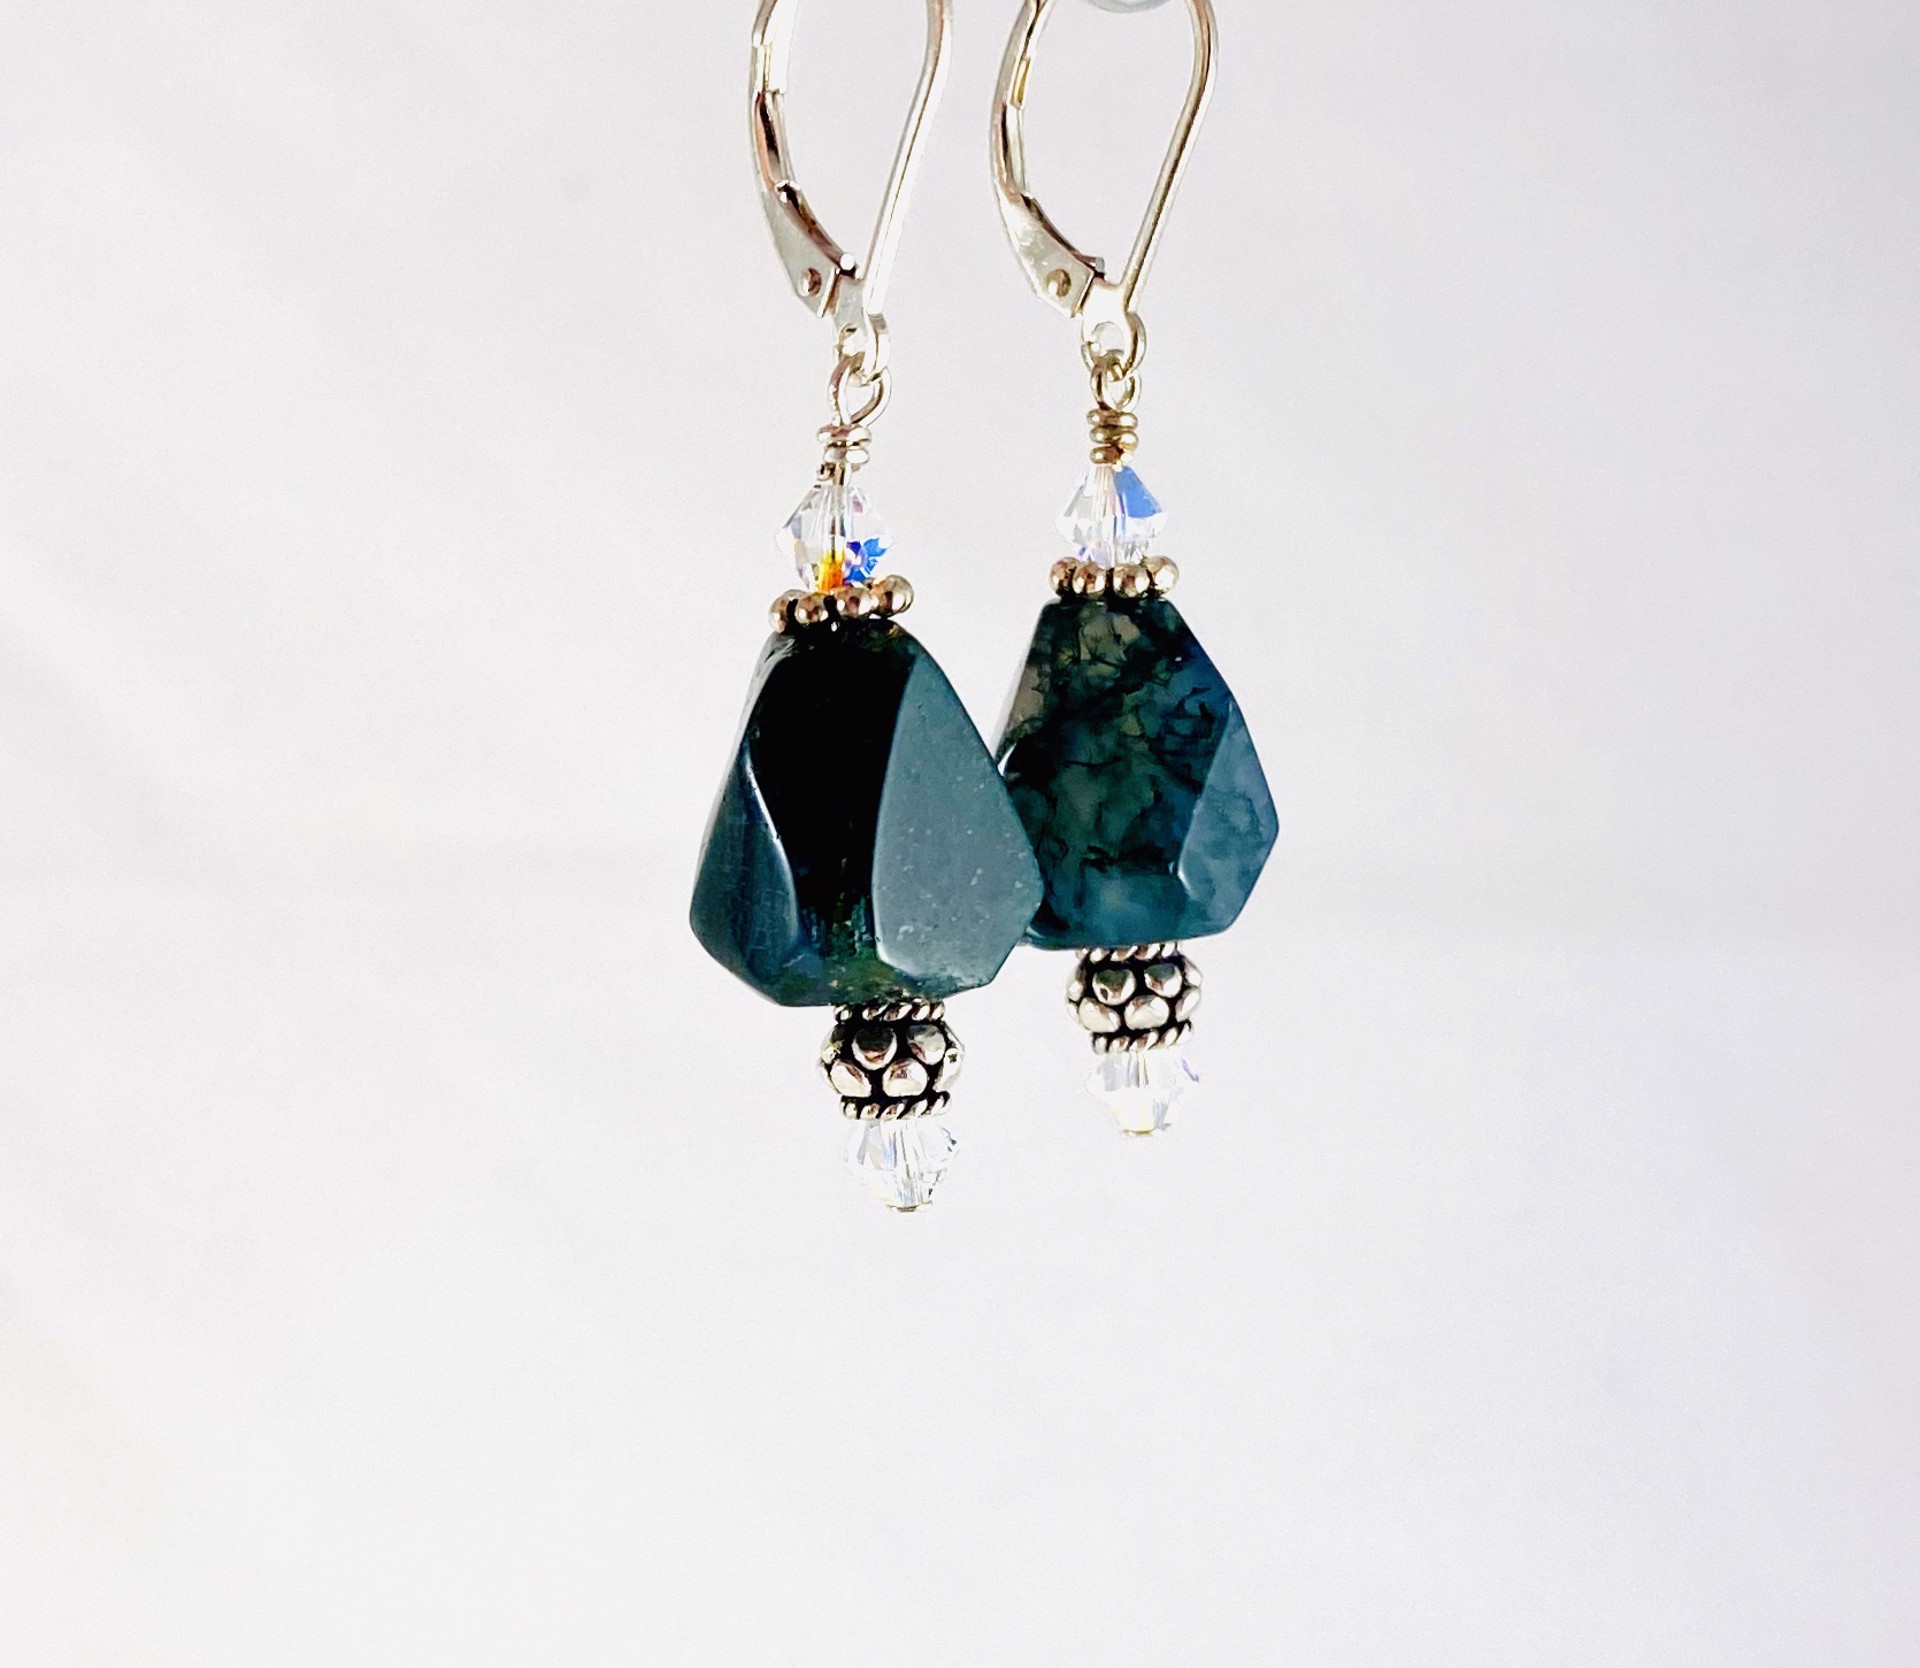 Faceted Variegated Stone Crystal Earrings SHOSH19-12 by Shoshannah Weinisch